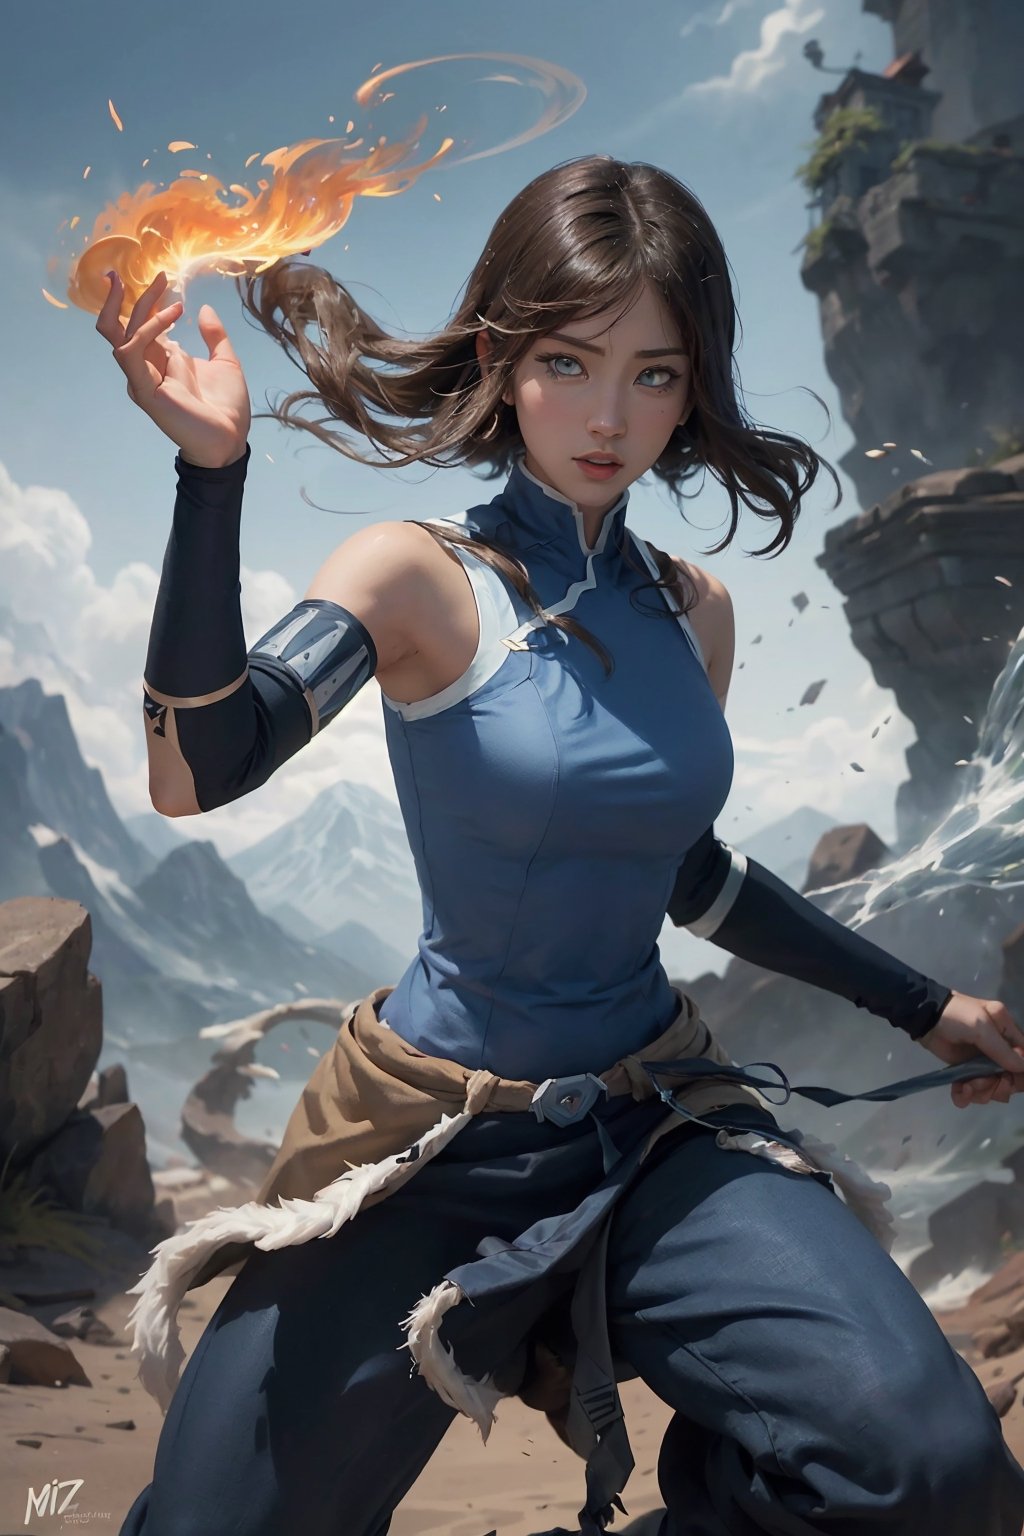 A dynamic digital painting of Korra, the Avatar from "The Legend of Korra," in a powerful bending pose. The artwork should showcase her strength and determination, with vibrant colors and intricate details. Inspired by the styles of Bryan Konietzko and Studio Mir, the image should capture Korra's essence as a strong and fierce character, while incorporating elements of nature and the four elements she manipulates